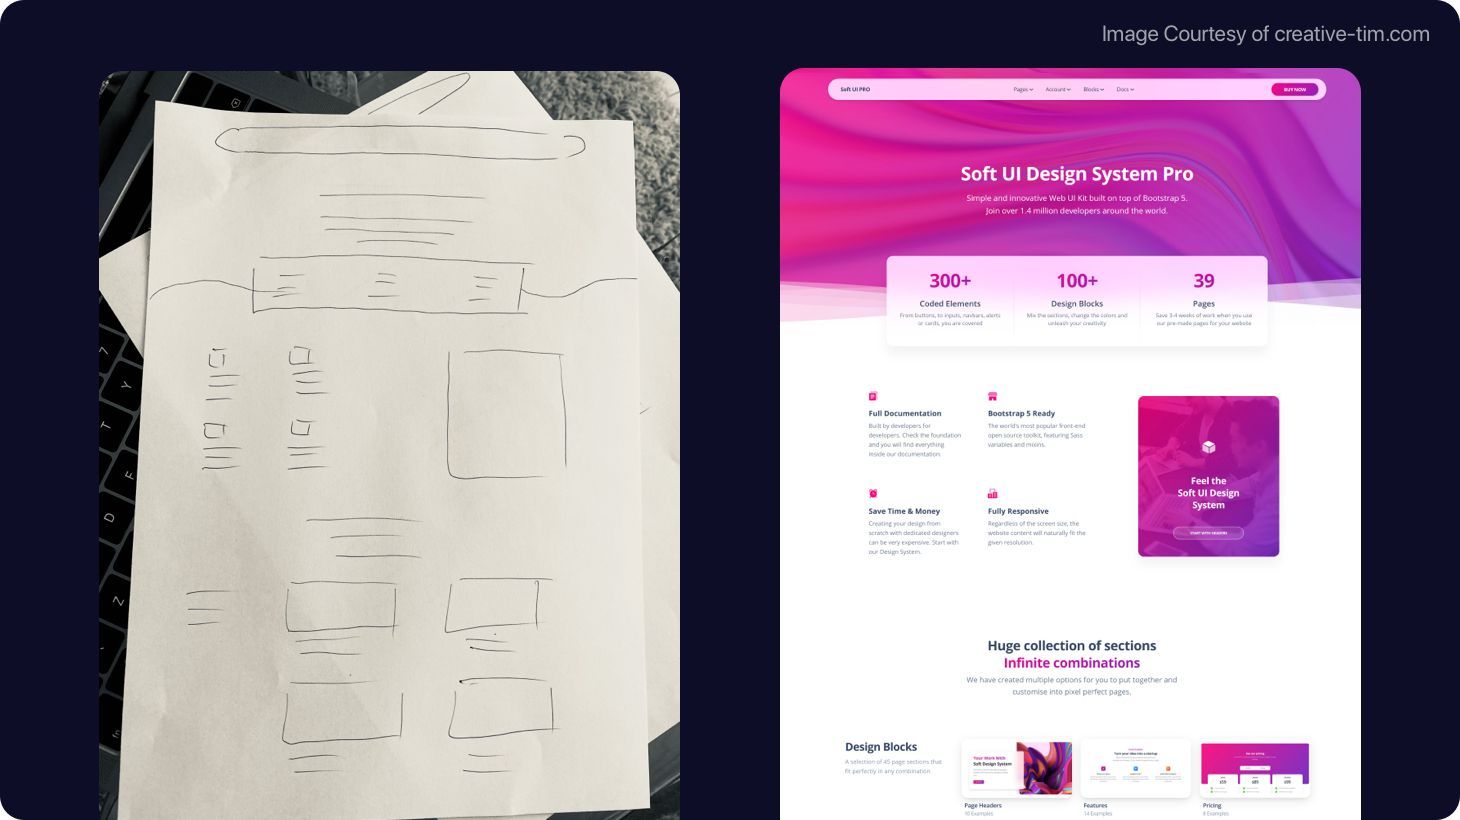 A simple UX design wireframe and a hi-fi UI prototype for the same web page.